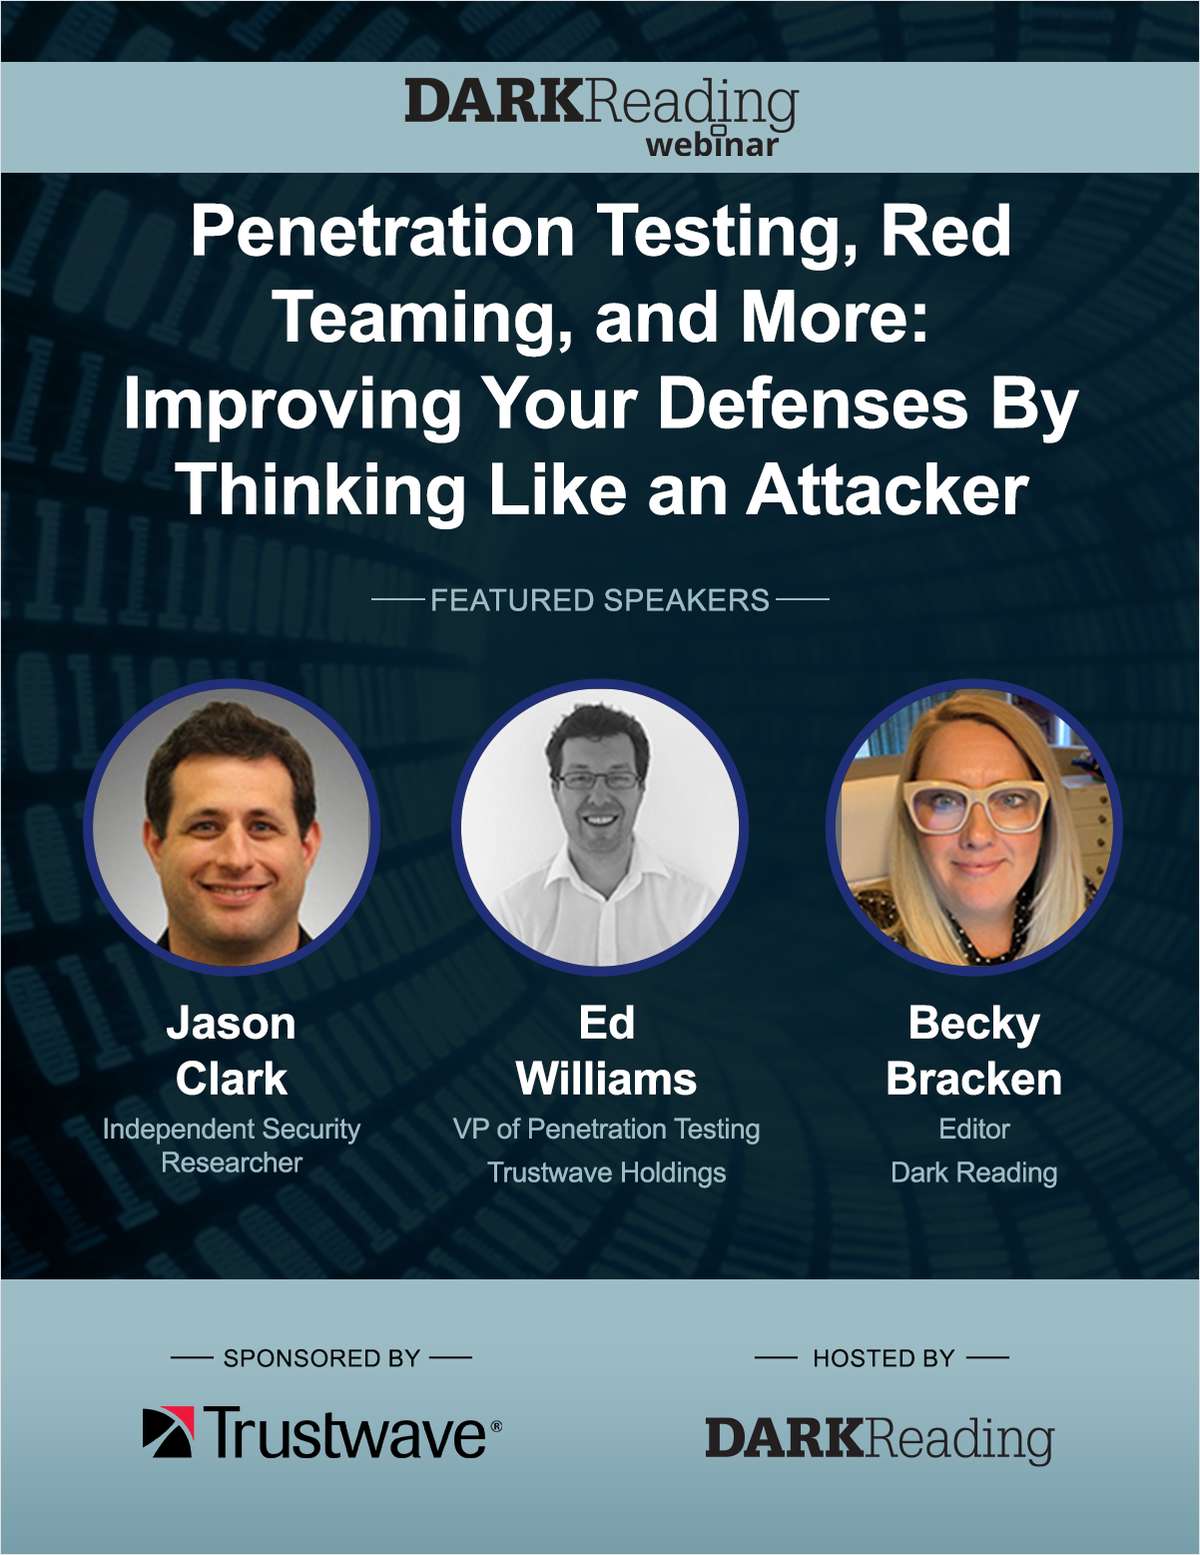 Penetration Testing, Red Teaming, and More: Improving Your Defenses By Thinking Like an Attacker